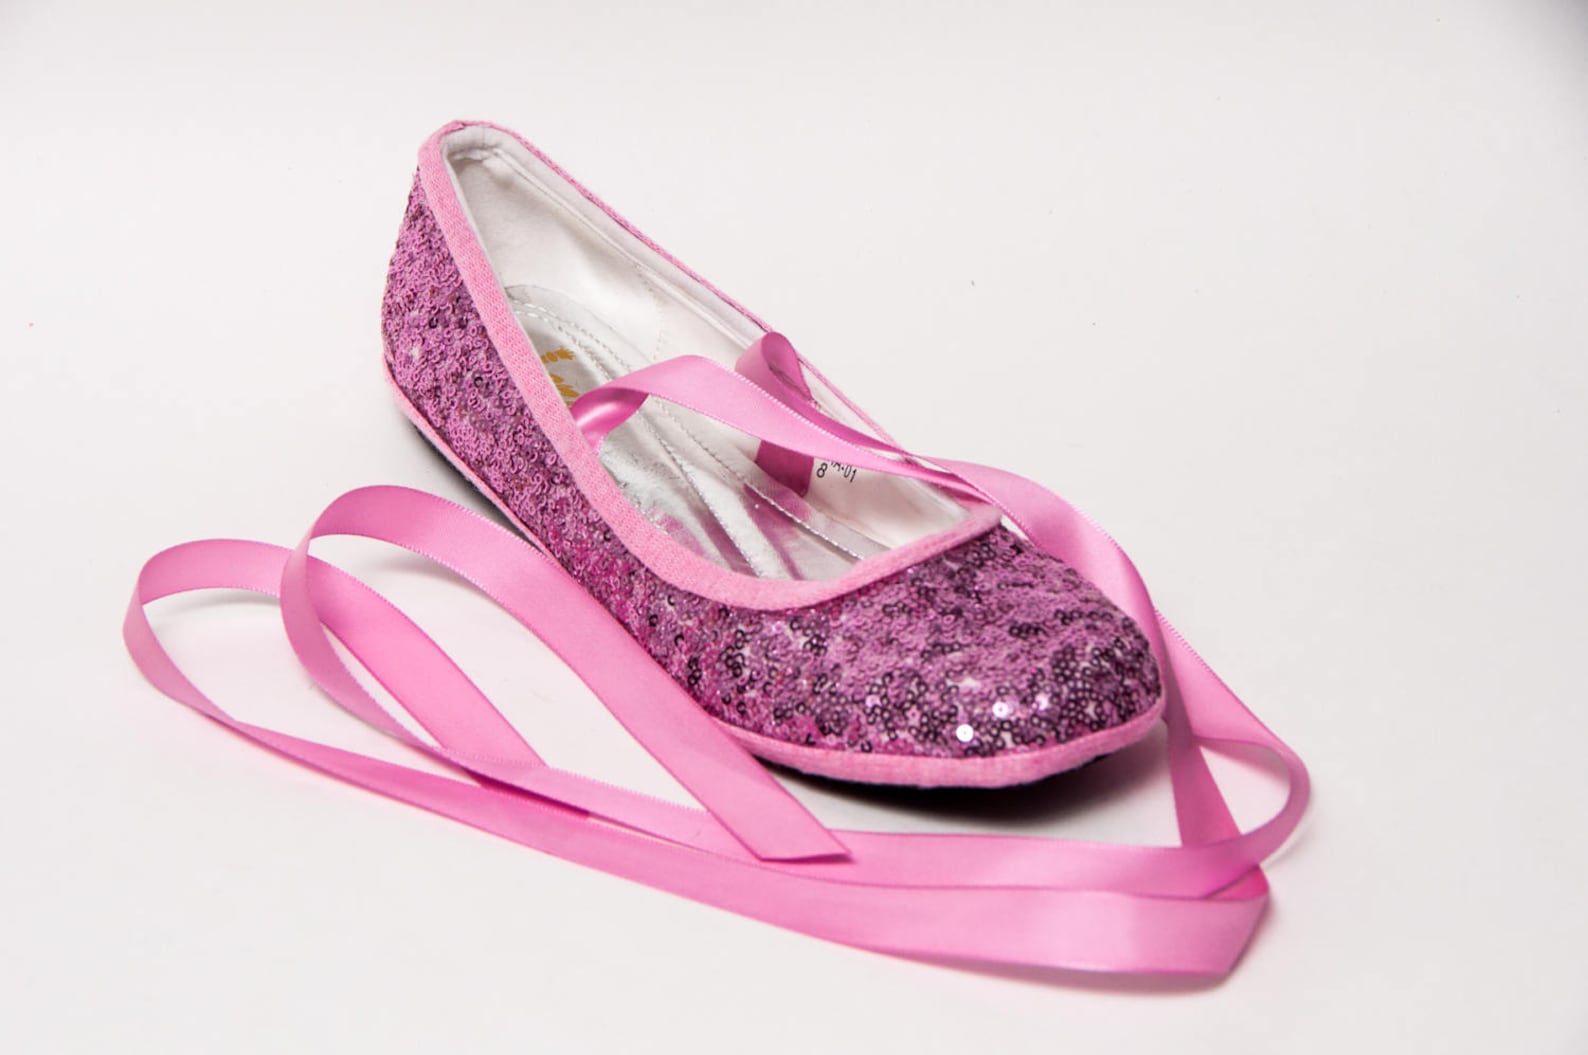 tiny sequin - blush pink ballet flats slippers shoes with matching ribbons